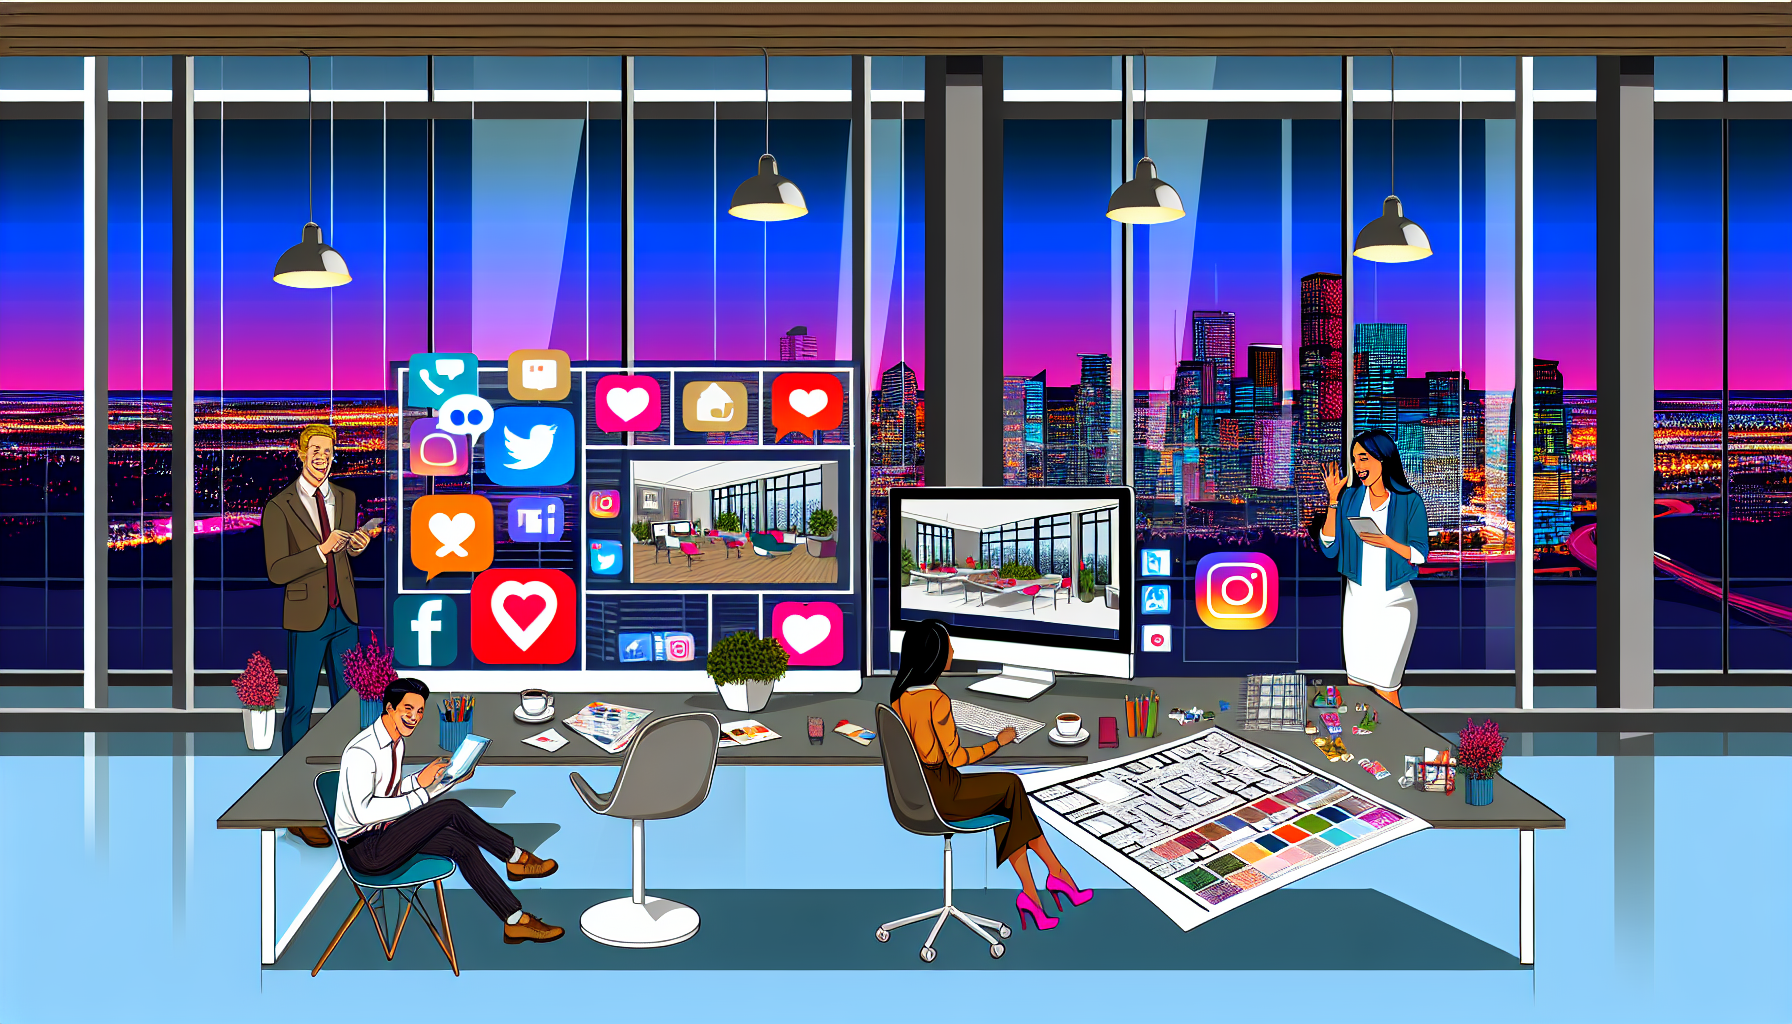 Social media marketing and networking for interior design services